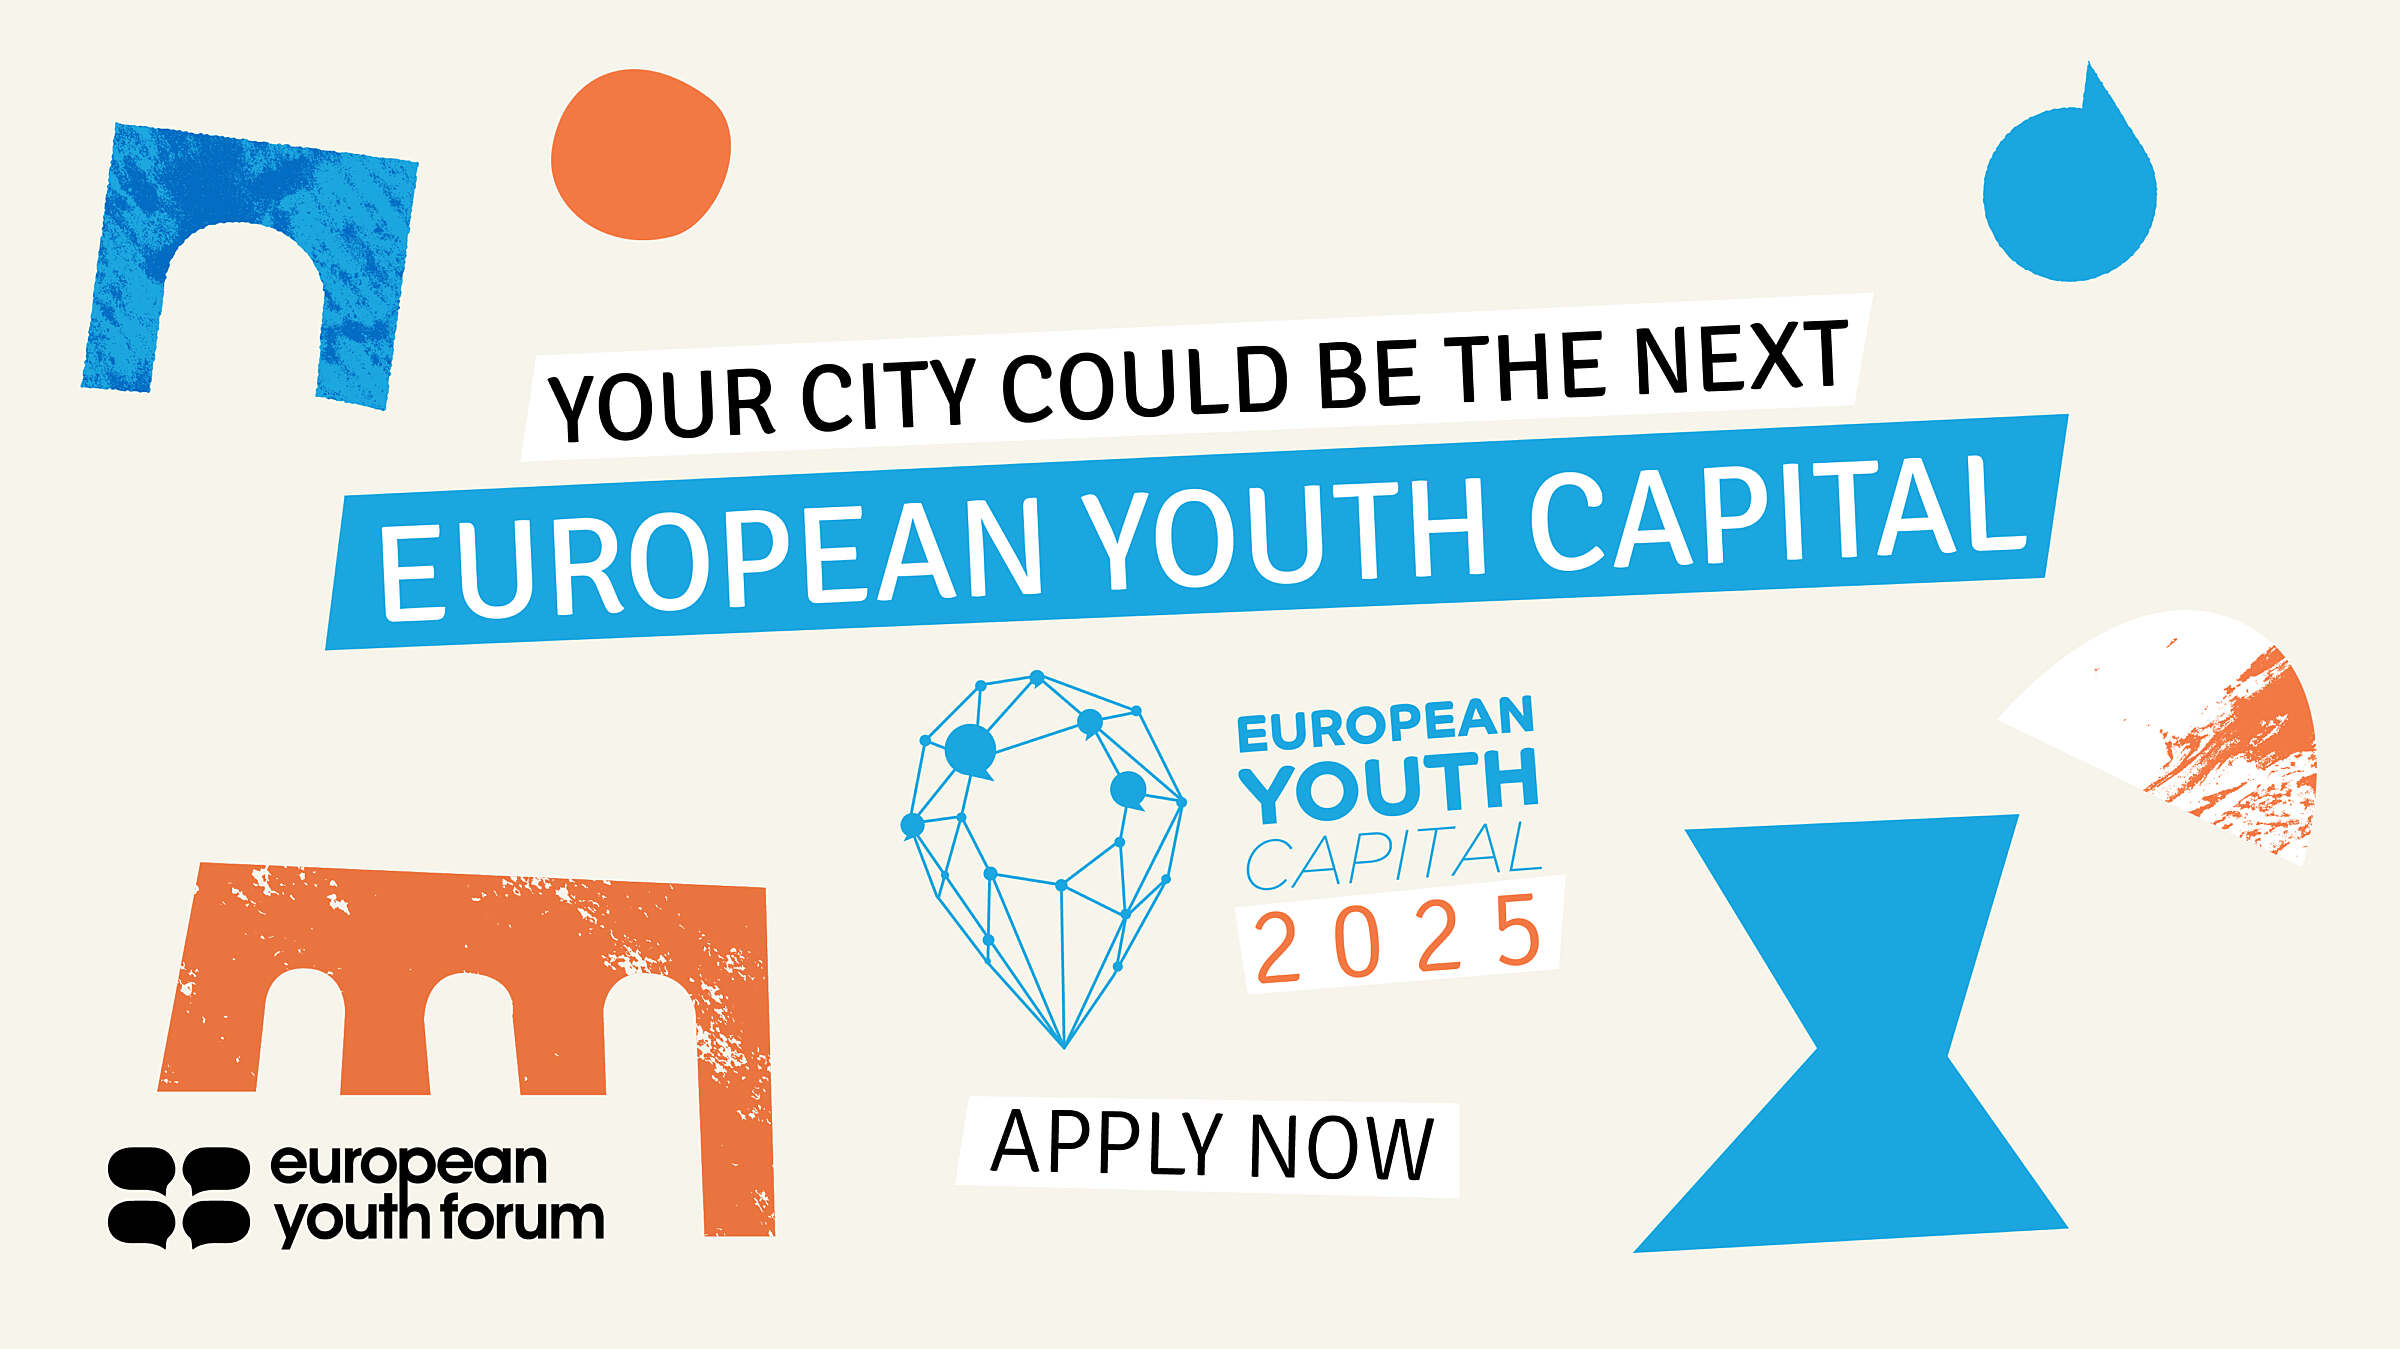 Applications to be the European Youth Capital 2025 are now open